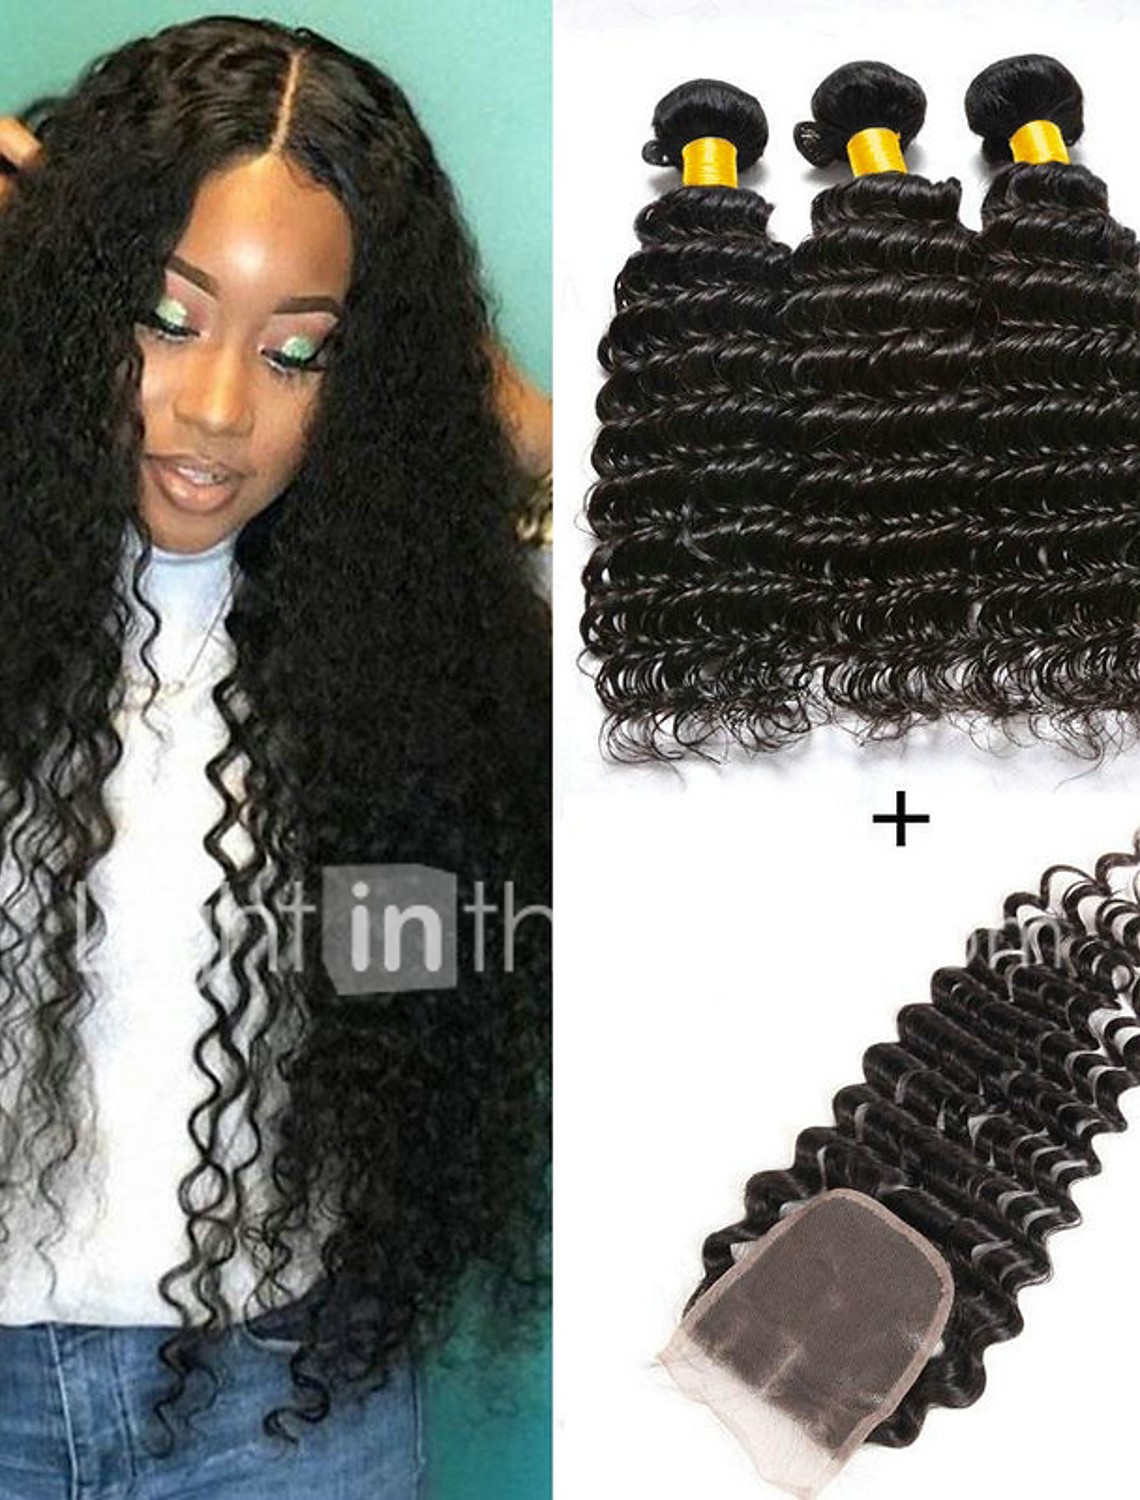 3 Bundles With Closure Brazilian Hair Curly Human Hair Natural Color Hair Weaves Hair Bulk One Pack Solution Human Hair Extensions 8 22 Inch Natural Human Hair Weaves Classic Best Quality For Black 54 99